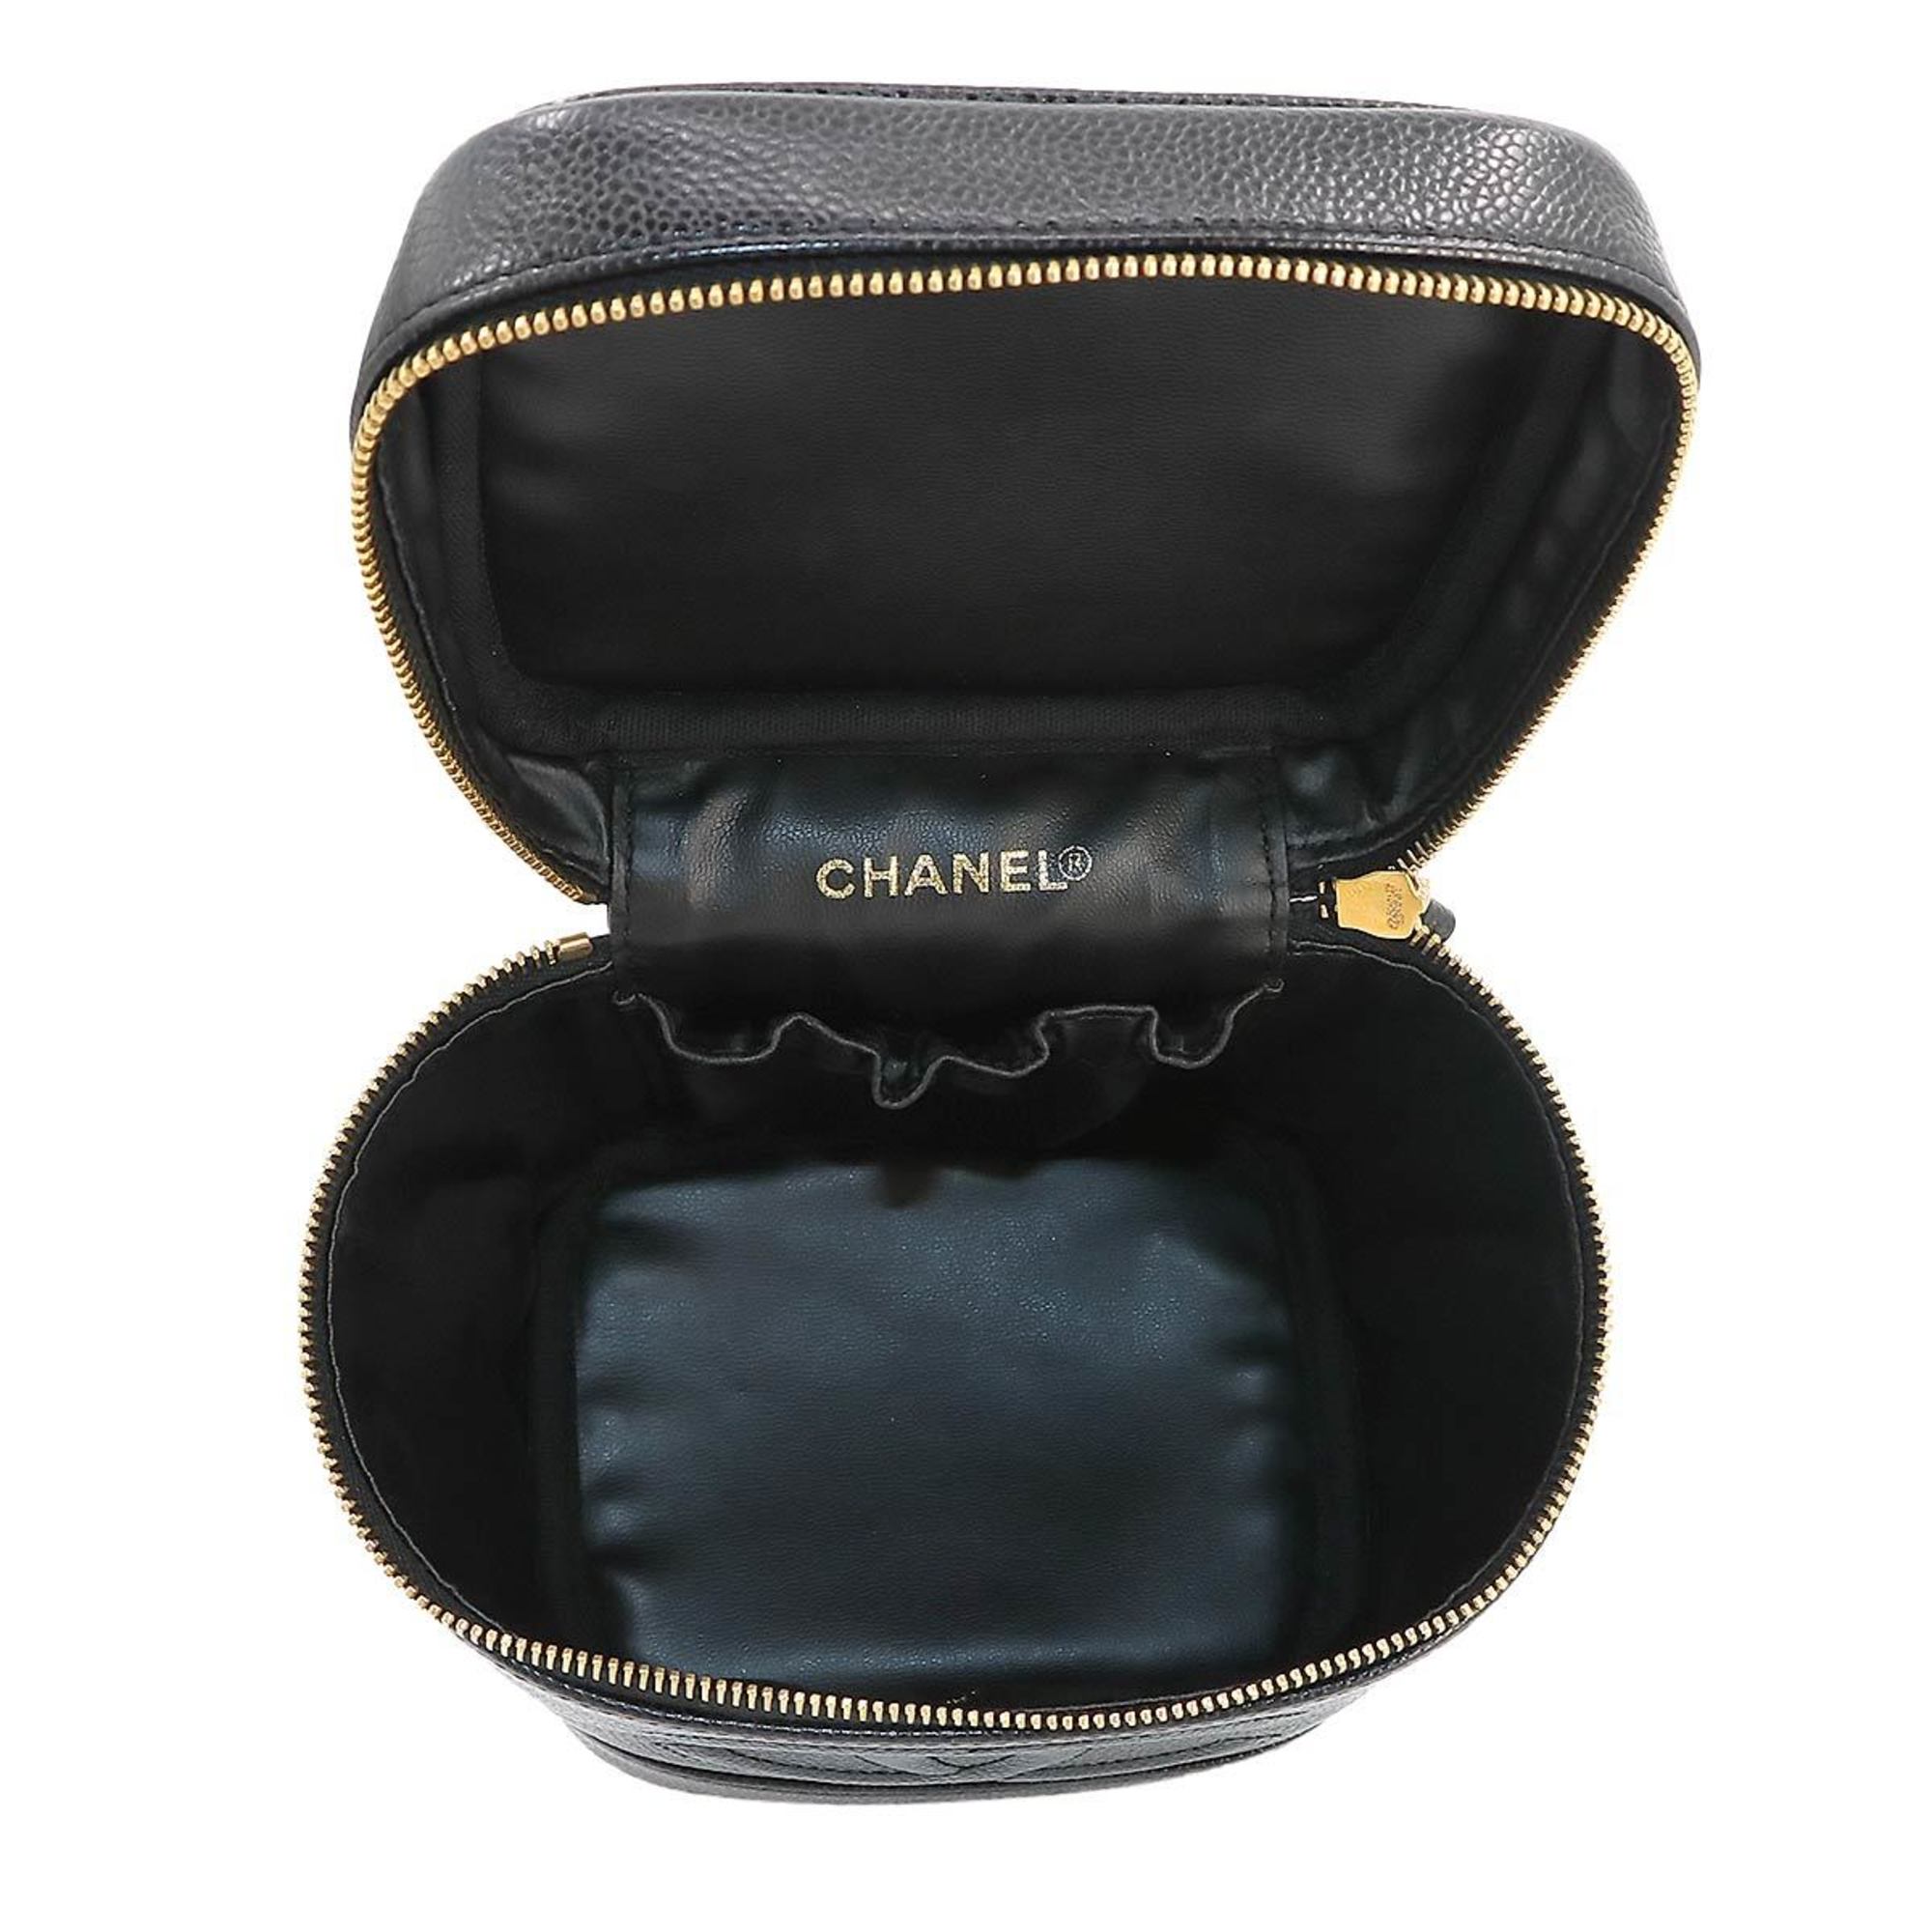 CHANEL Vanity Hand Bag Caviar Skin Leather Black A01998 Coco Mark Gold Hardware